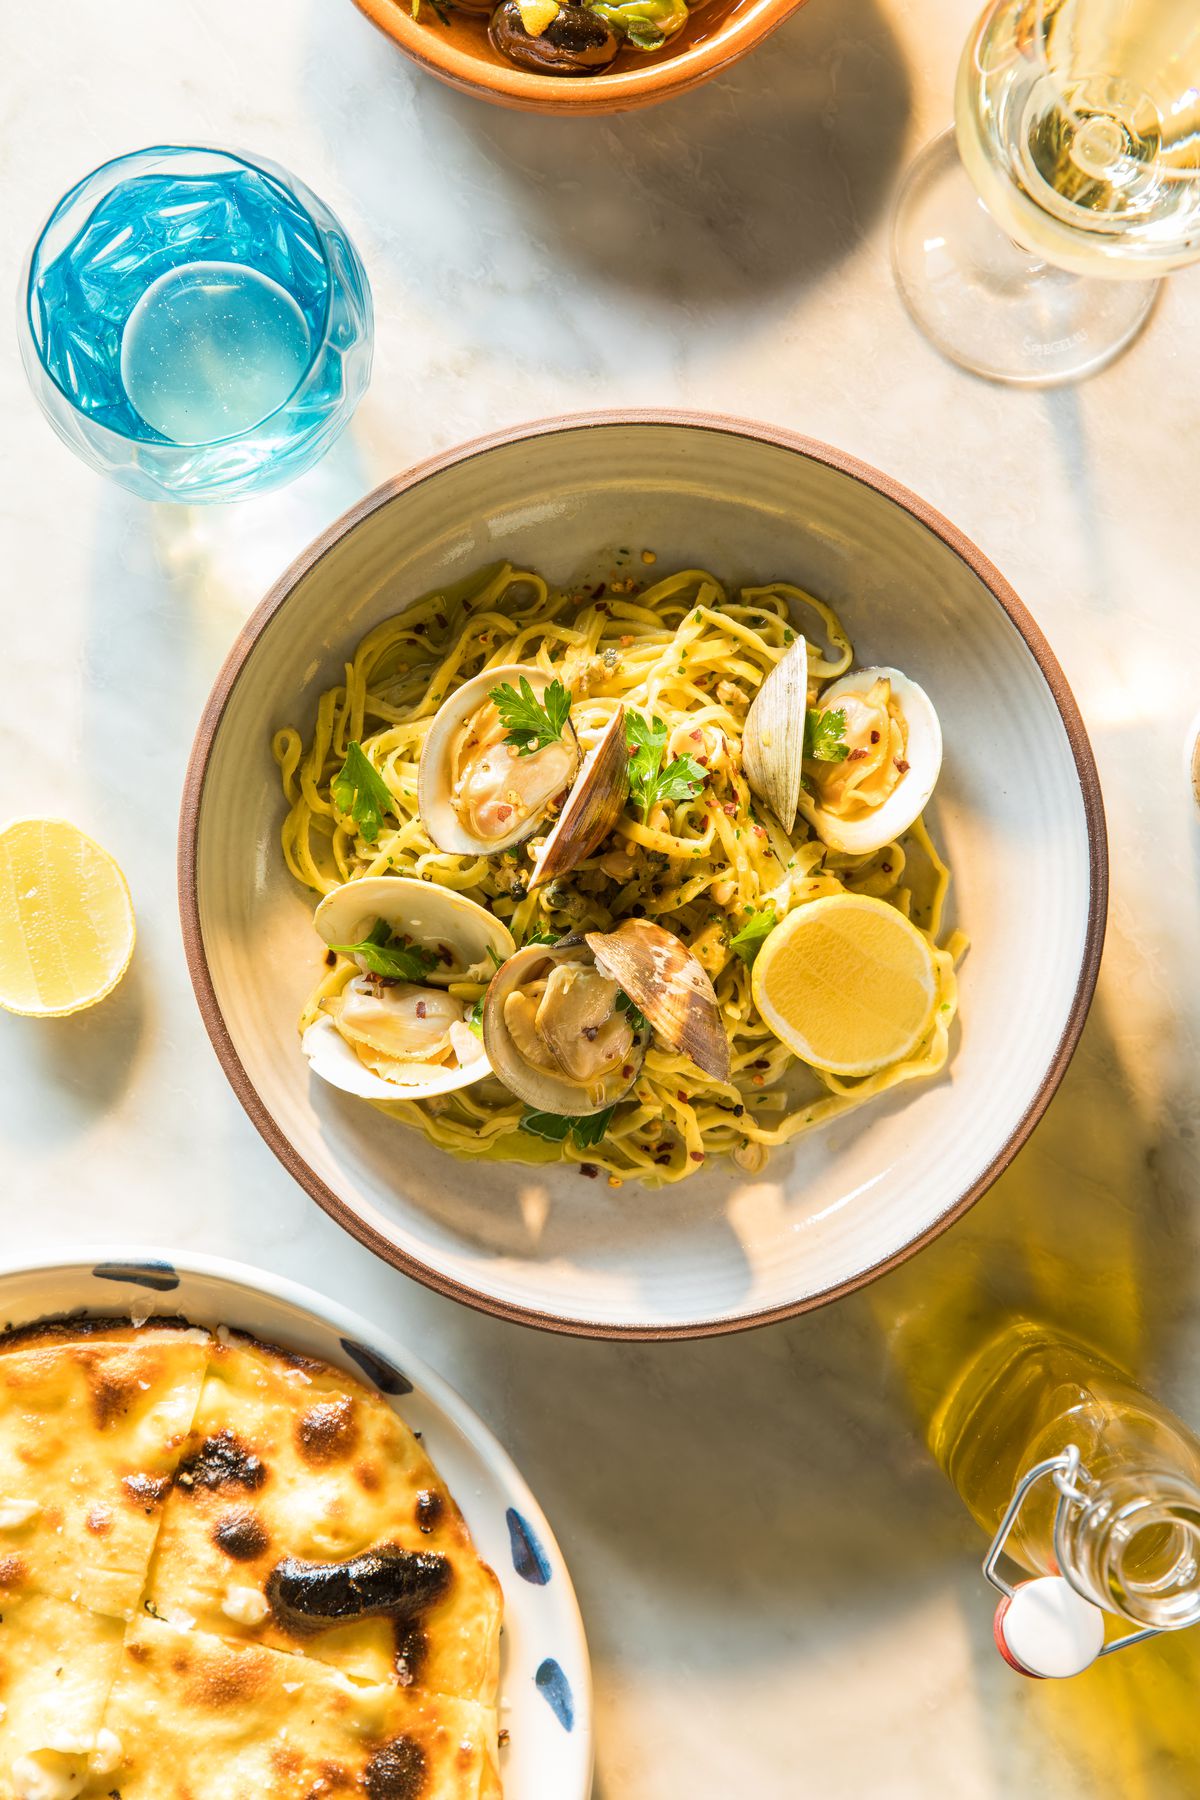 Linguine and clams at Osteria Costa